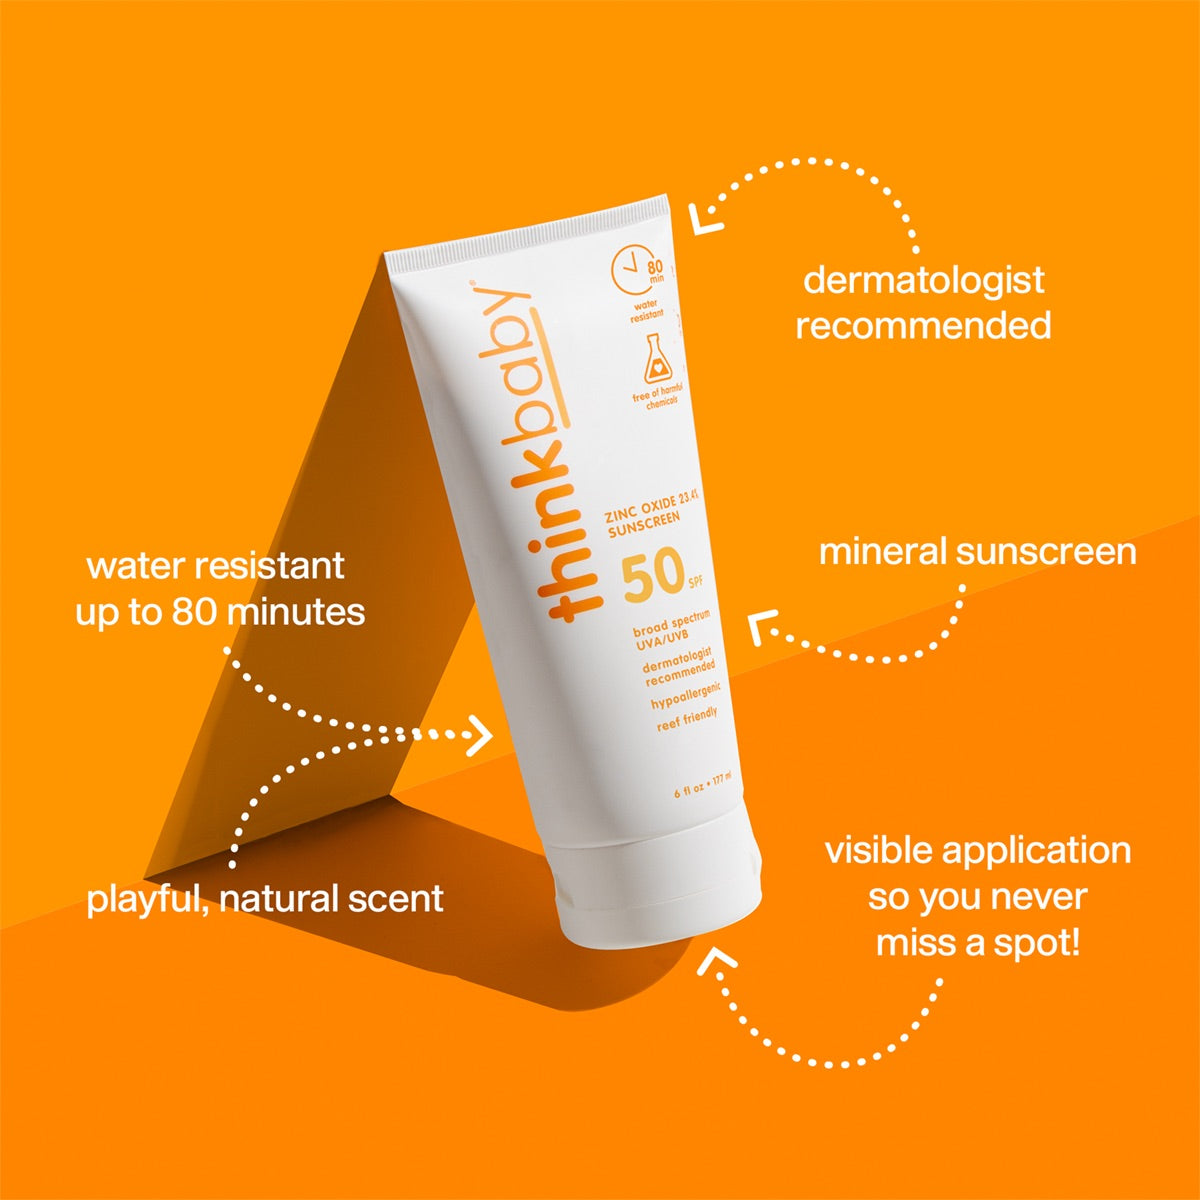 Thinkbaby sunscreen tube with SPF 50 against an orange background with highlights of key benefits: water resistance up to 80 minutes, dermatologist recommended, mineral sunscreen, playful natural scent, and visible application